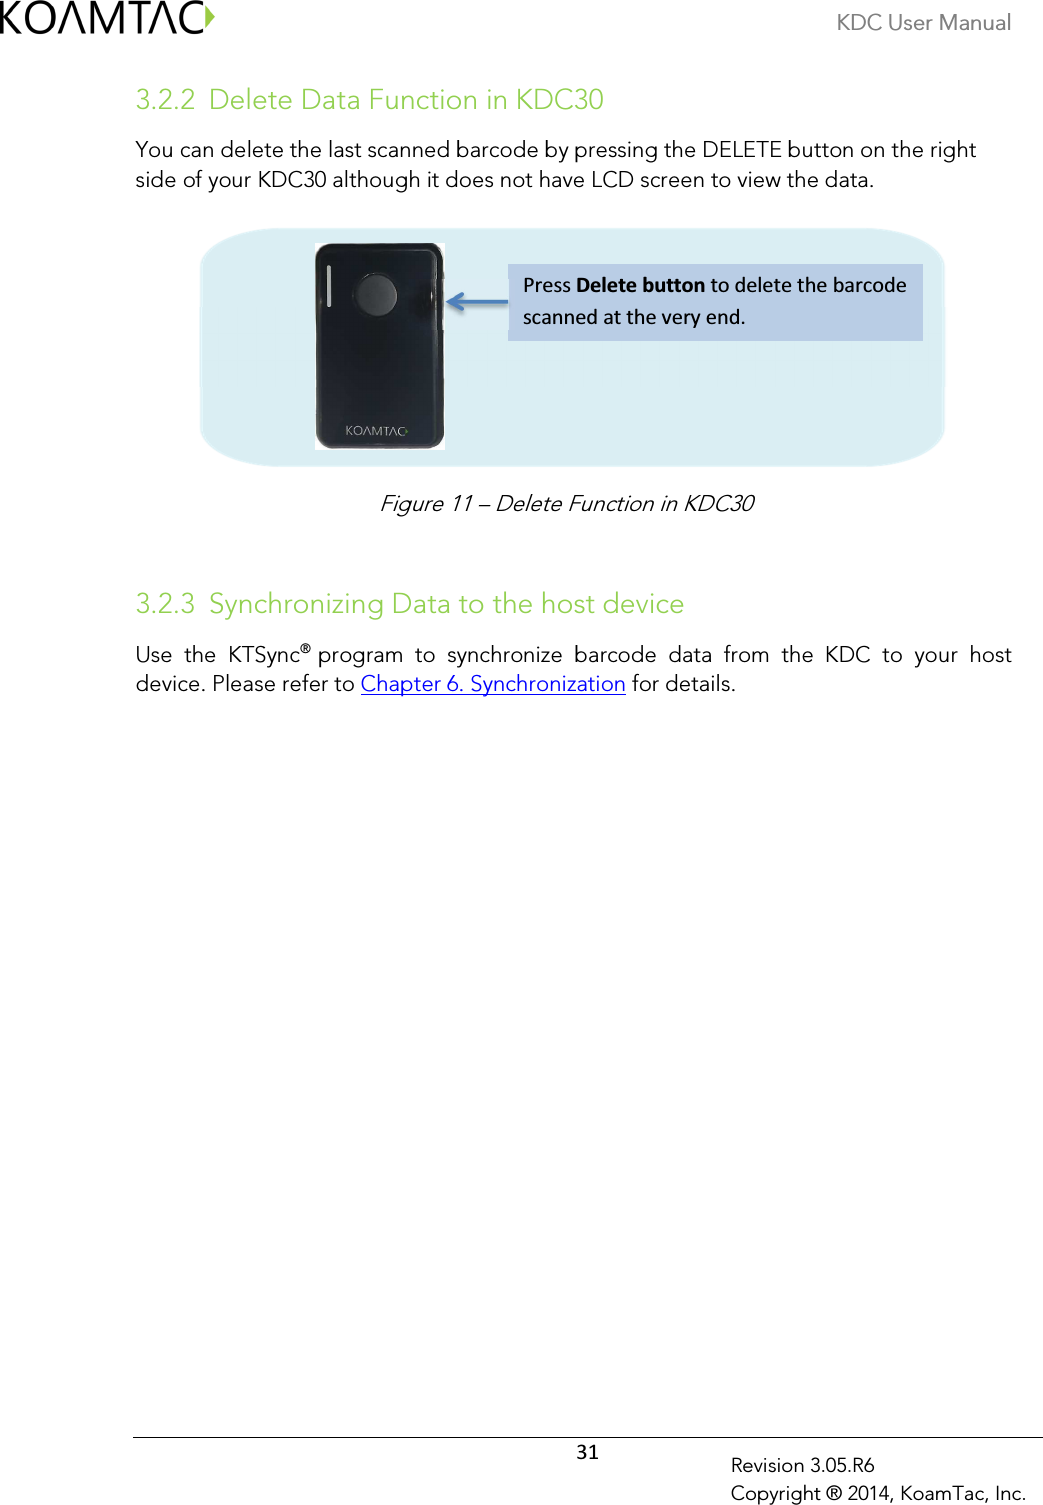 KDC User Manual  31 Revision 3.05.R6 Copyright ® 2014, KoamTac, Inc. 3.2.2 Delete Data Function in KDC30 You can delete the last scanned barcode by pressing the DELETE button on the right side of your KDC30 although it does not have LCD screen to view the data.            3.2.3 Synchronizing Data to the host device Use  the  KTSync® program  to  synchronize  barcode  data  from  the  KDC  to  your  host device. Please refer to Chapter 6. Synchronization for details.               Press Delete button to delete the barcode scanned at the very end. Figure 11 – Delete Function in KDC30 